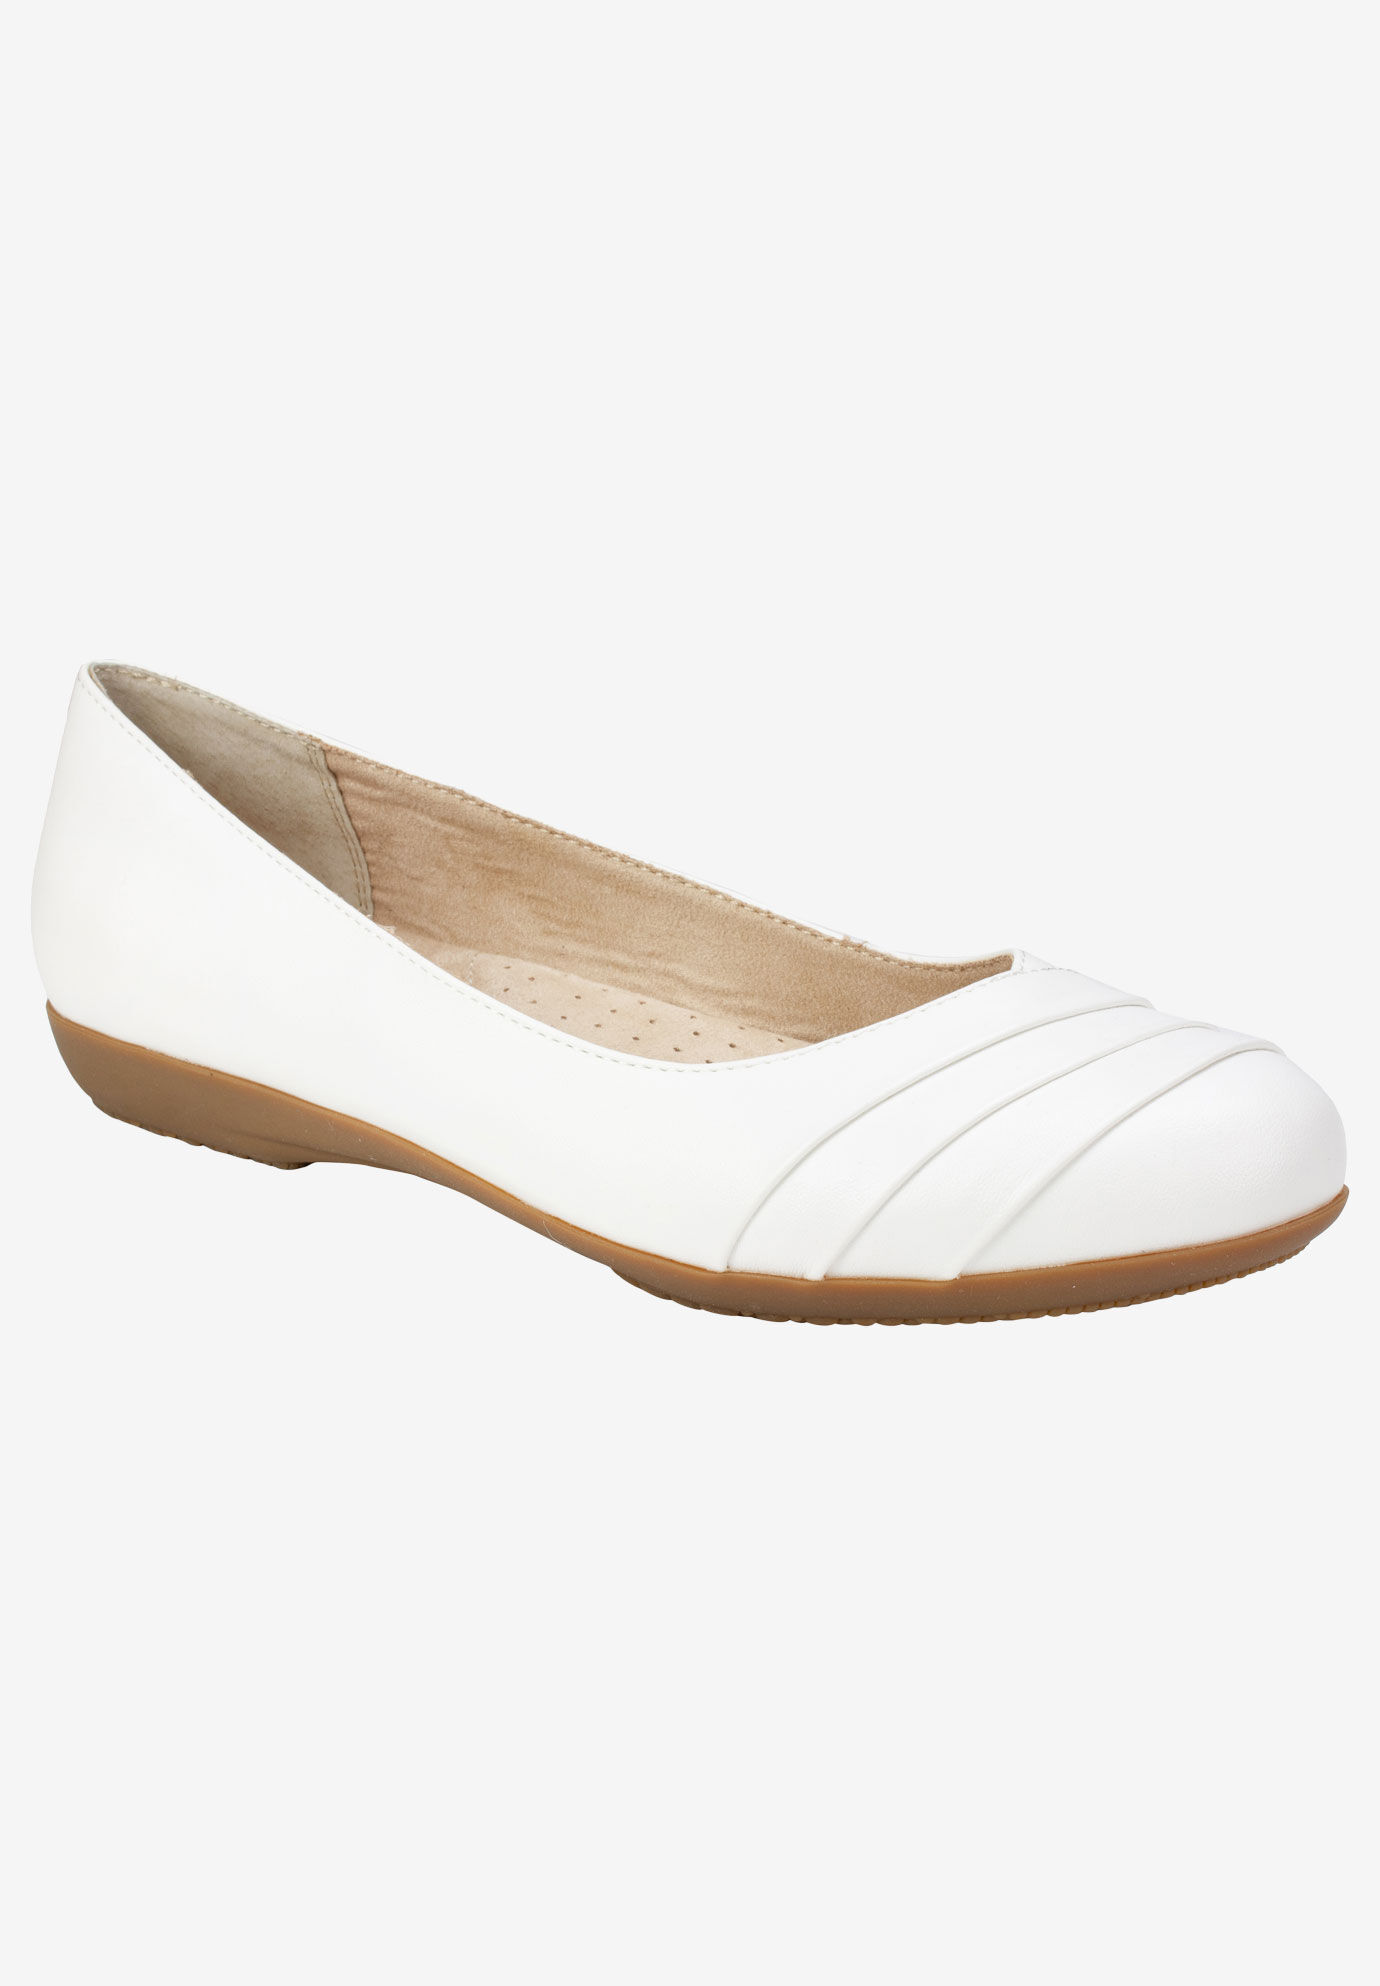 Wide Width Women's Clara Flat by Cliffs in White Burnished Smooth (Size 11 W)